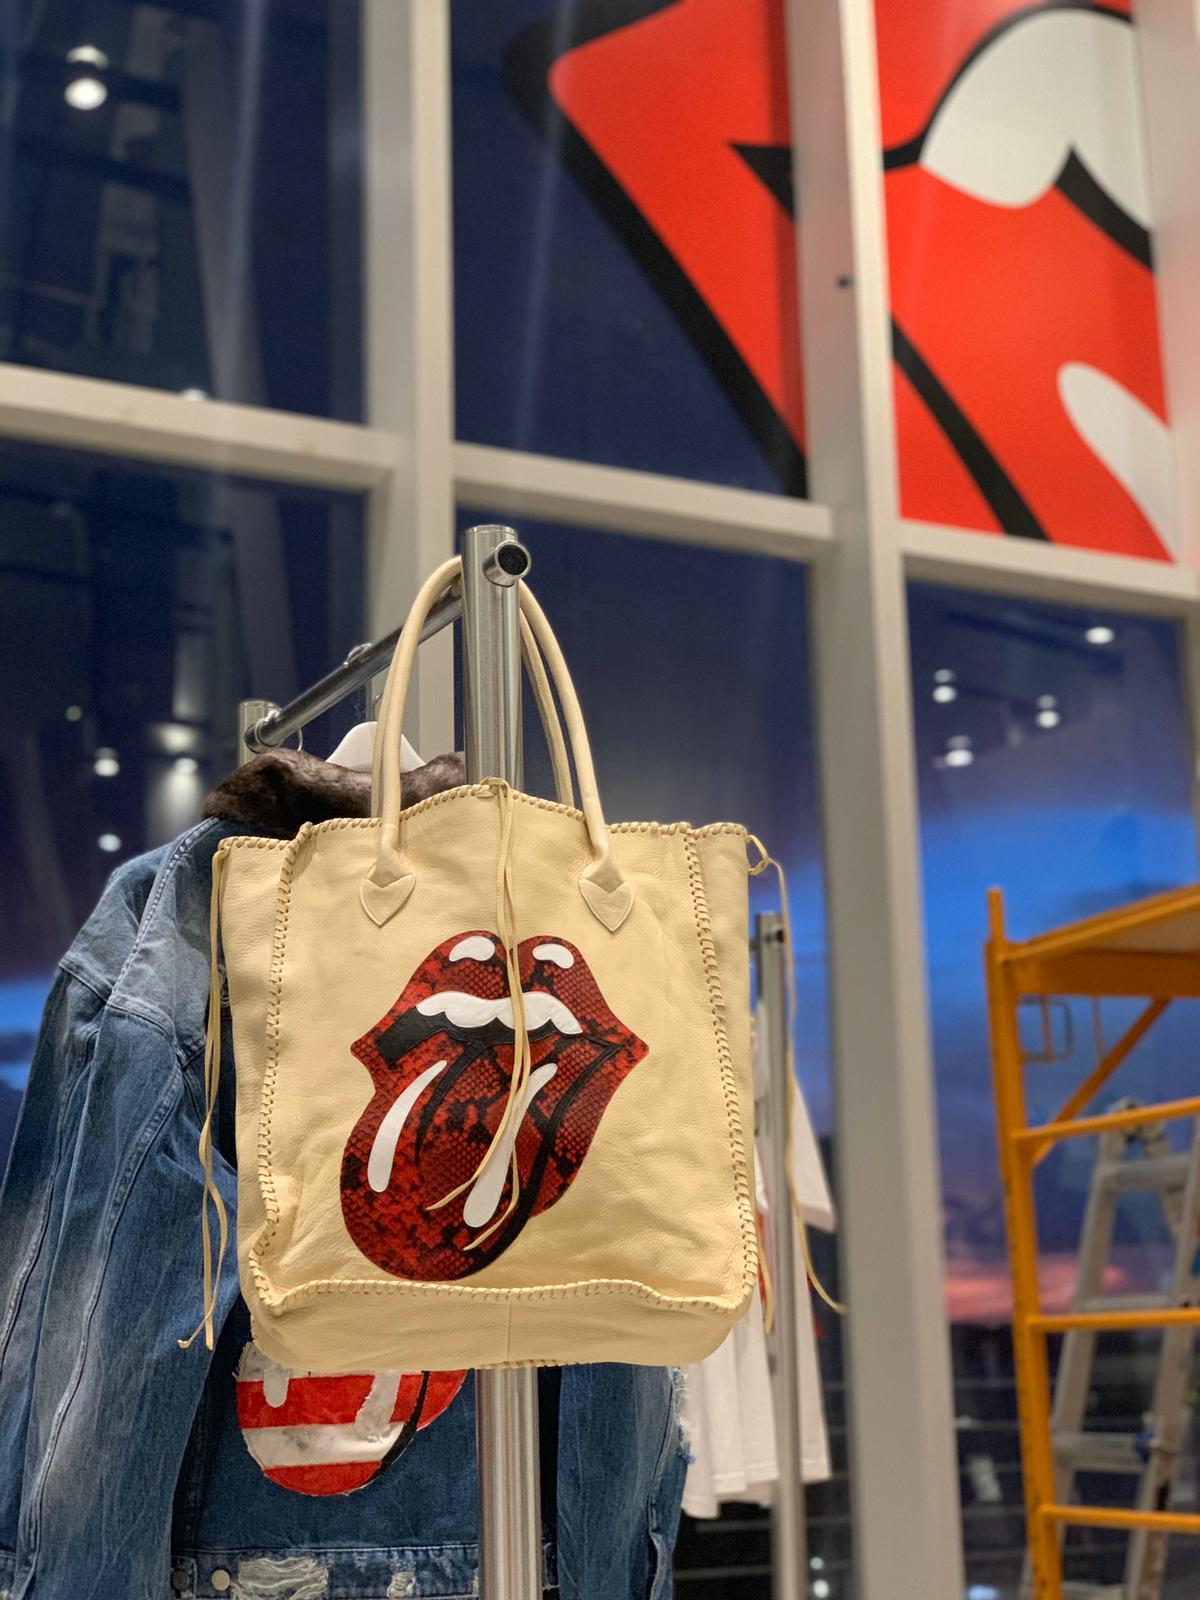 ROLLING STONES EXPERIENCE